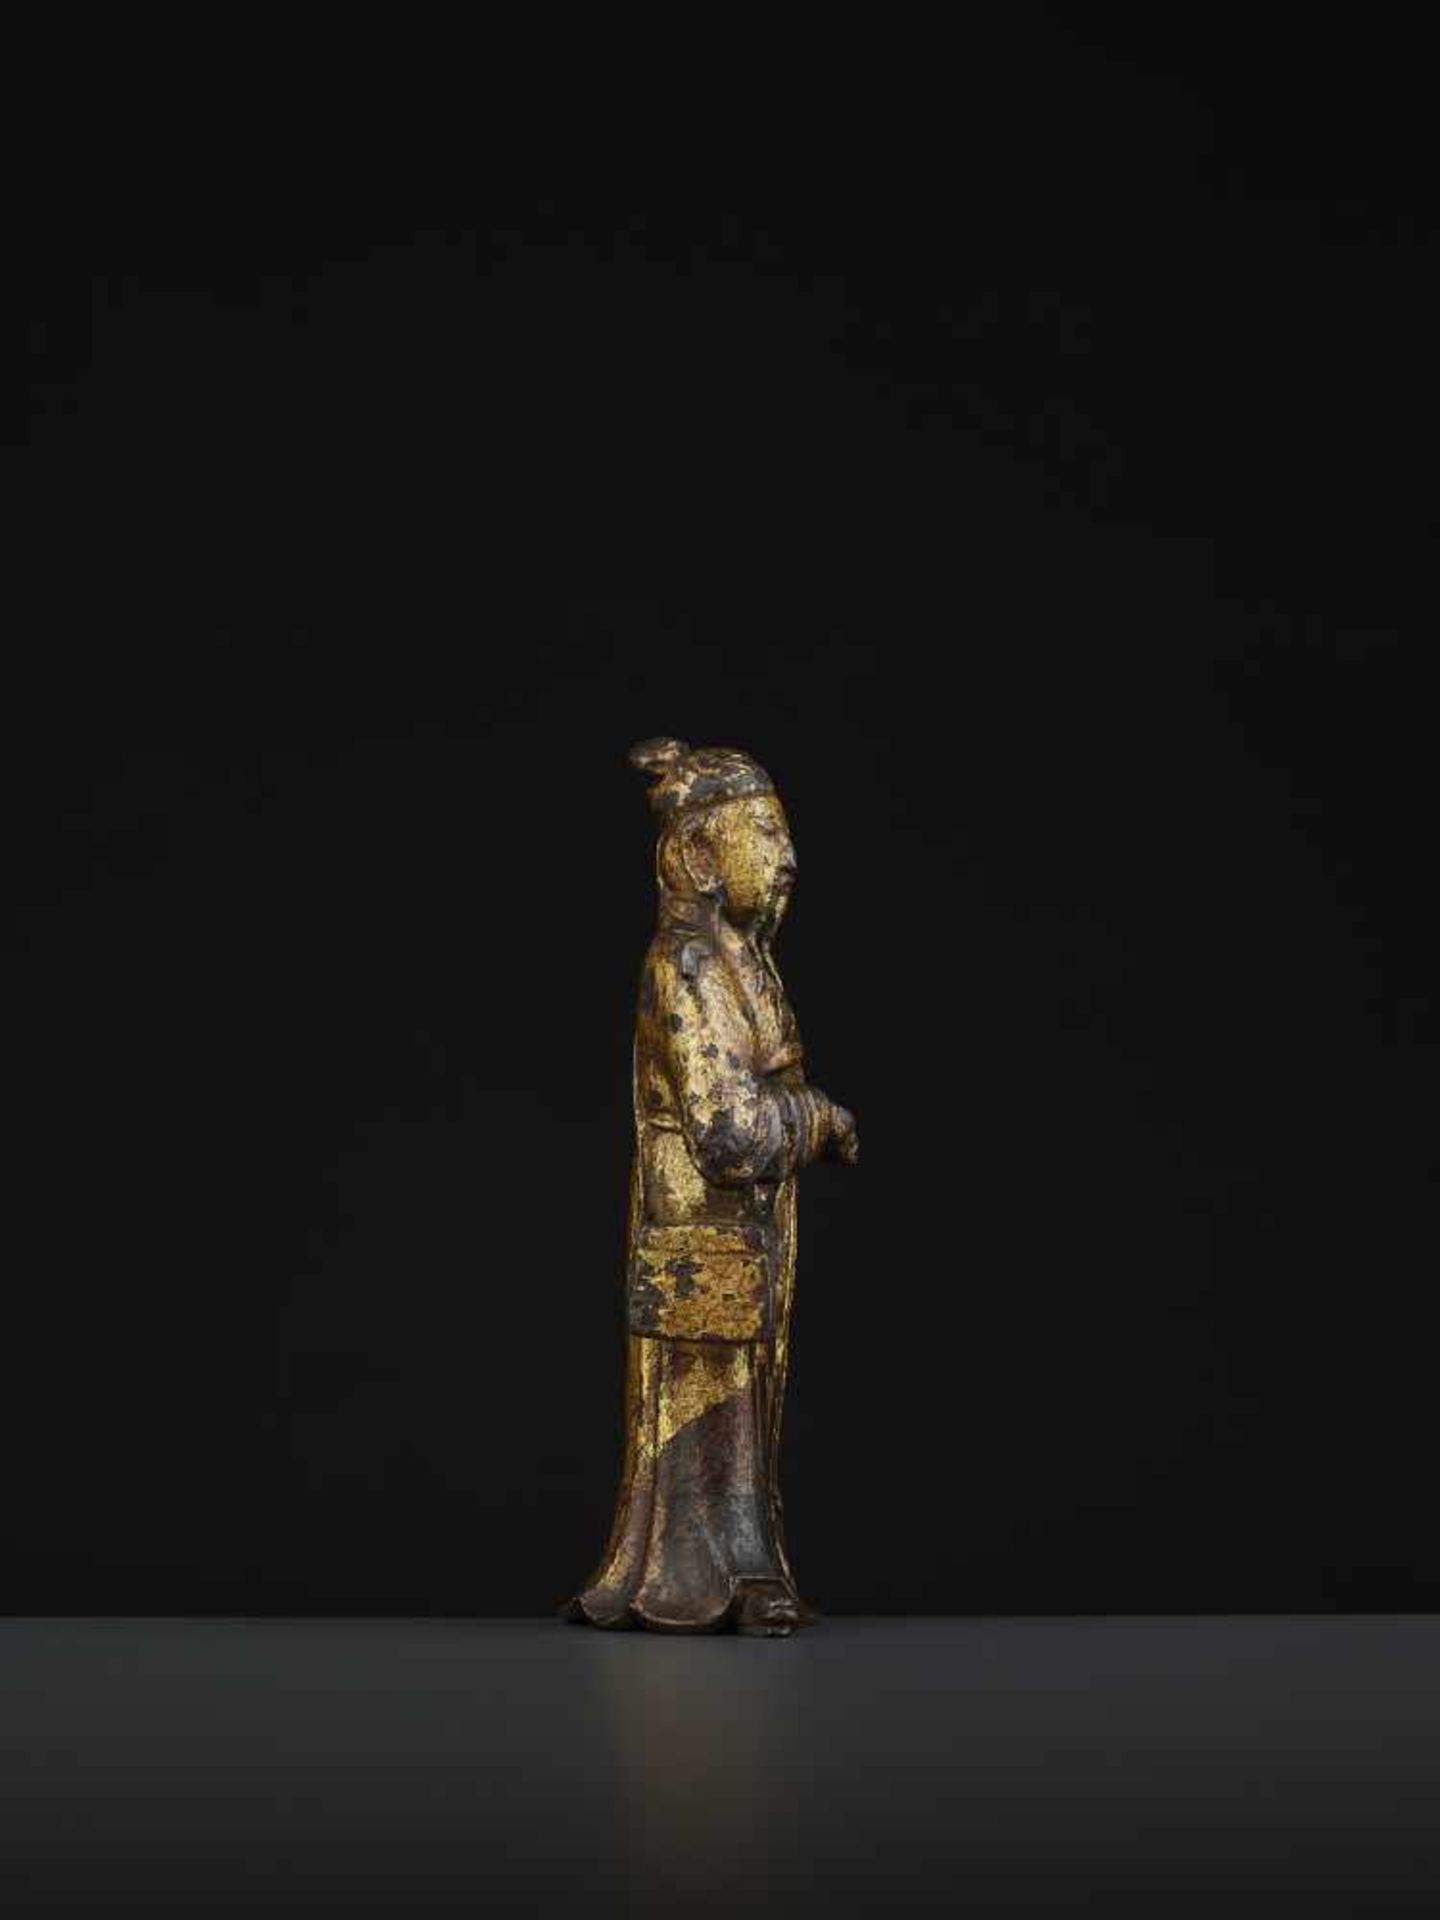 A MING DAOIST IMMORTAL BRONZEChina 16th - 17th century. The bronze with a rich gold lacquer coating. - Image 6 of 10